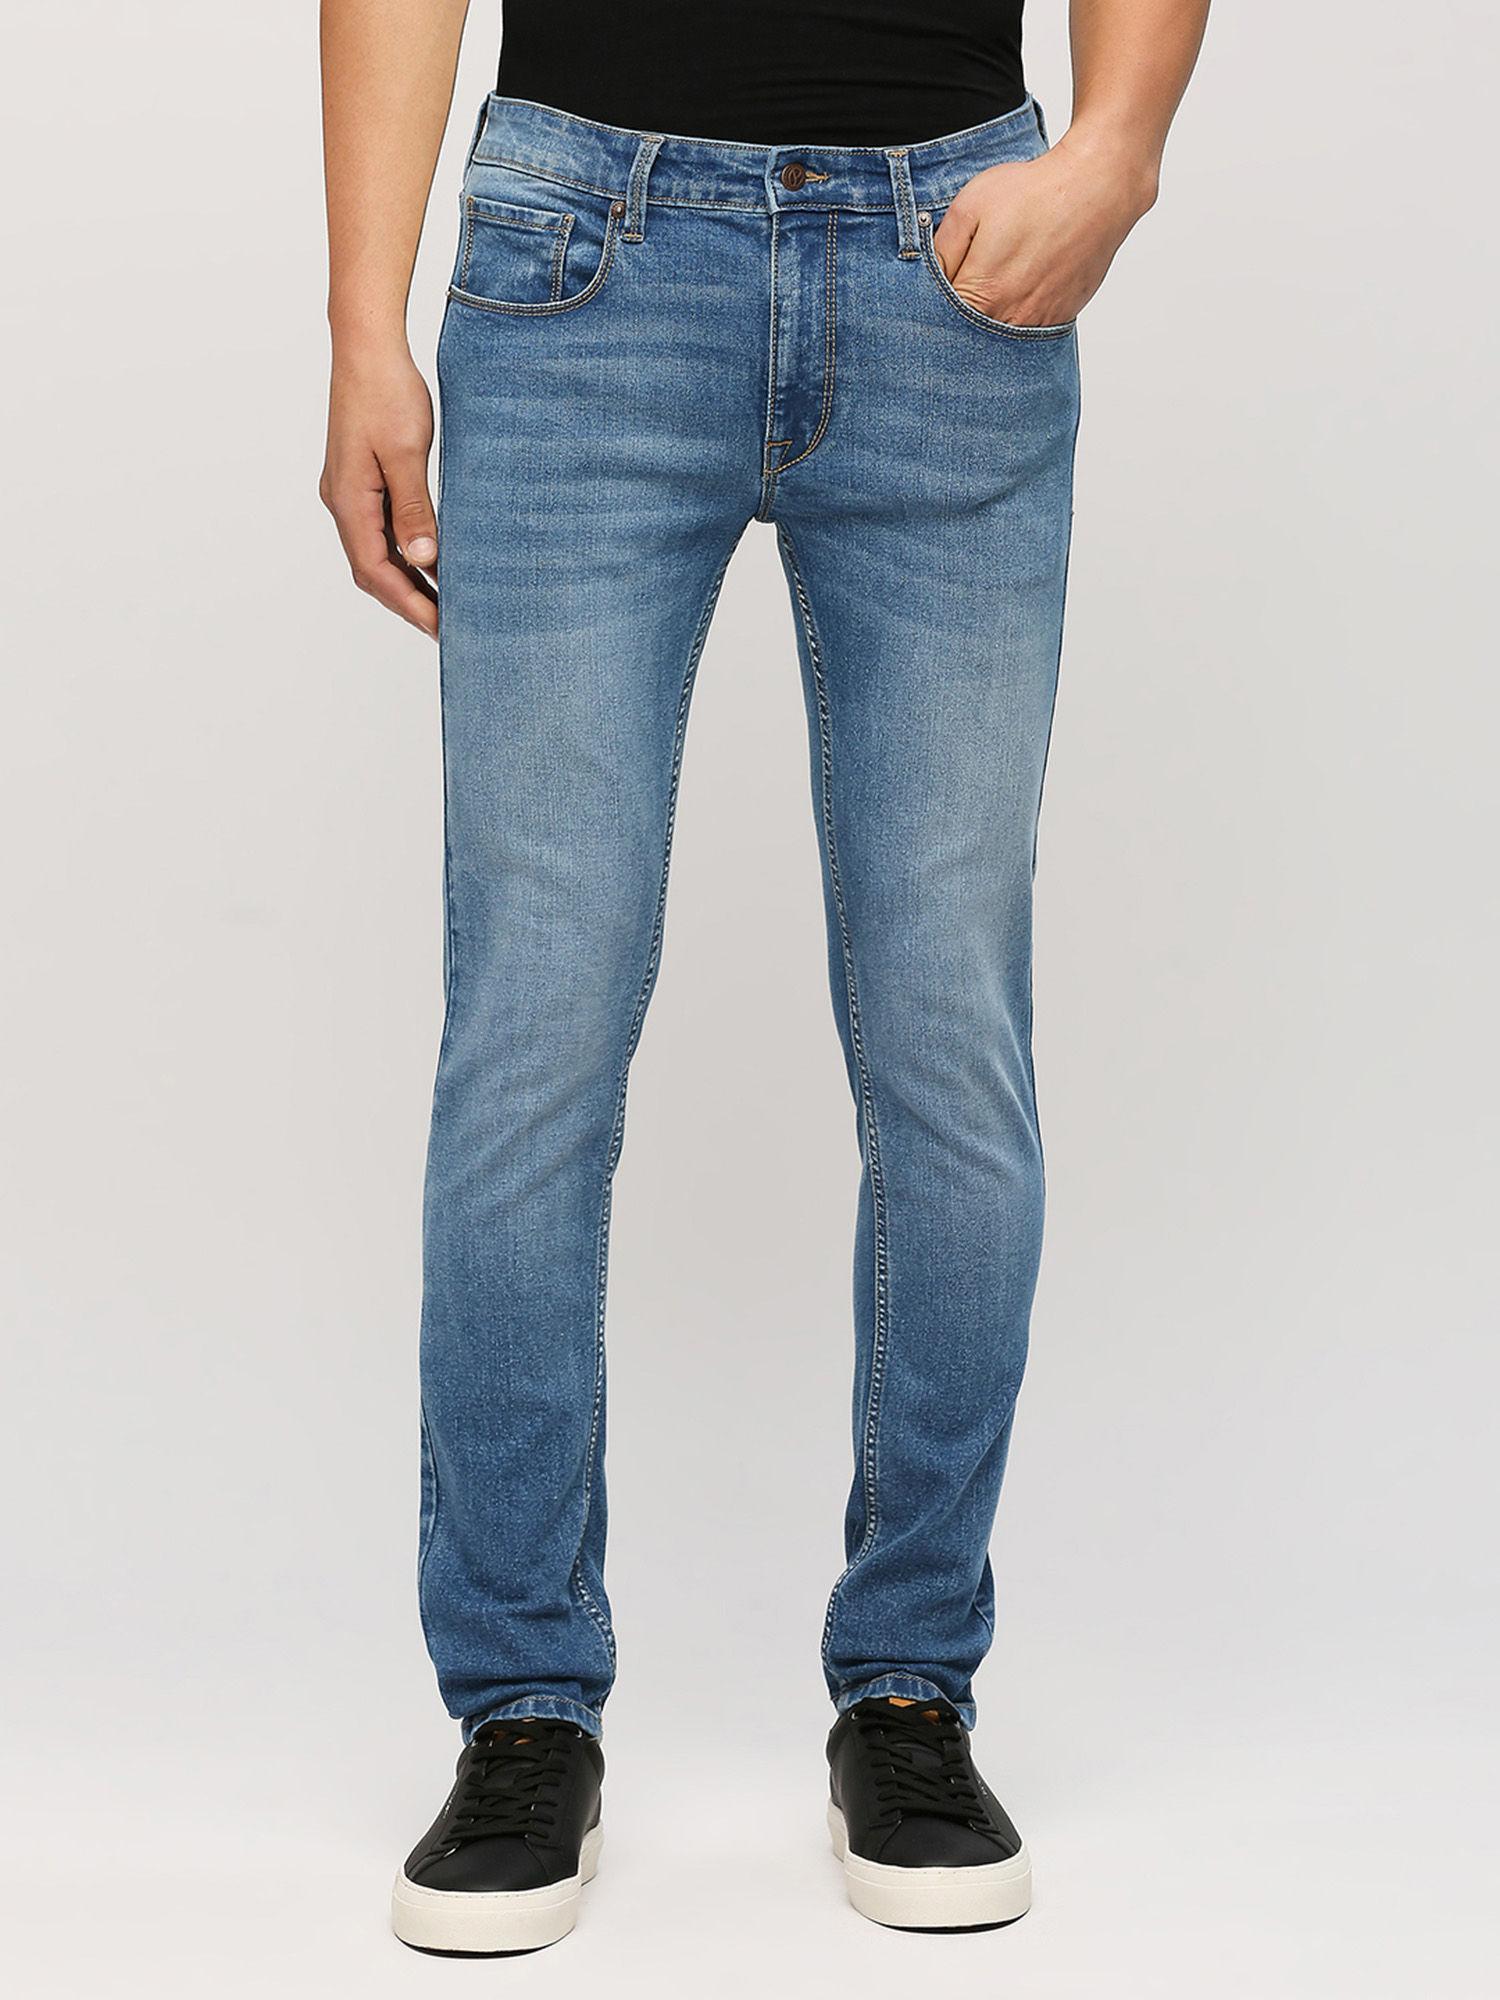 vapour-tapered-fit-low-waist-jeans-blue